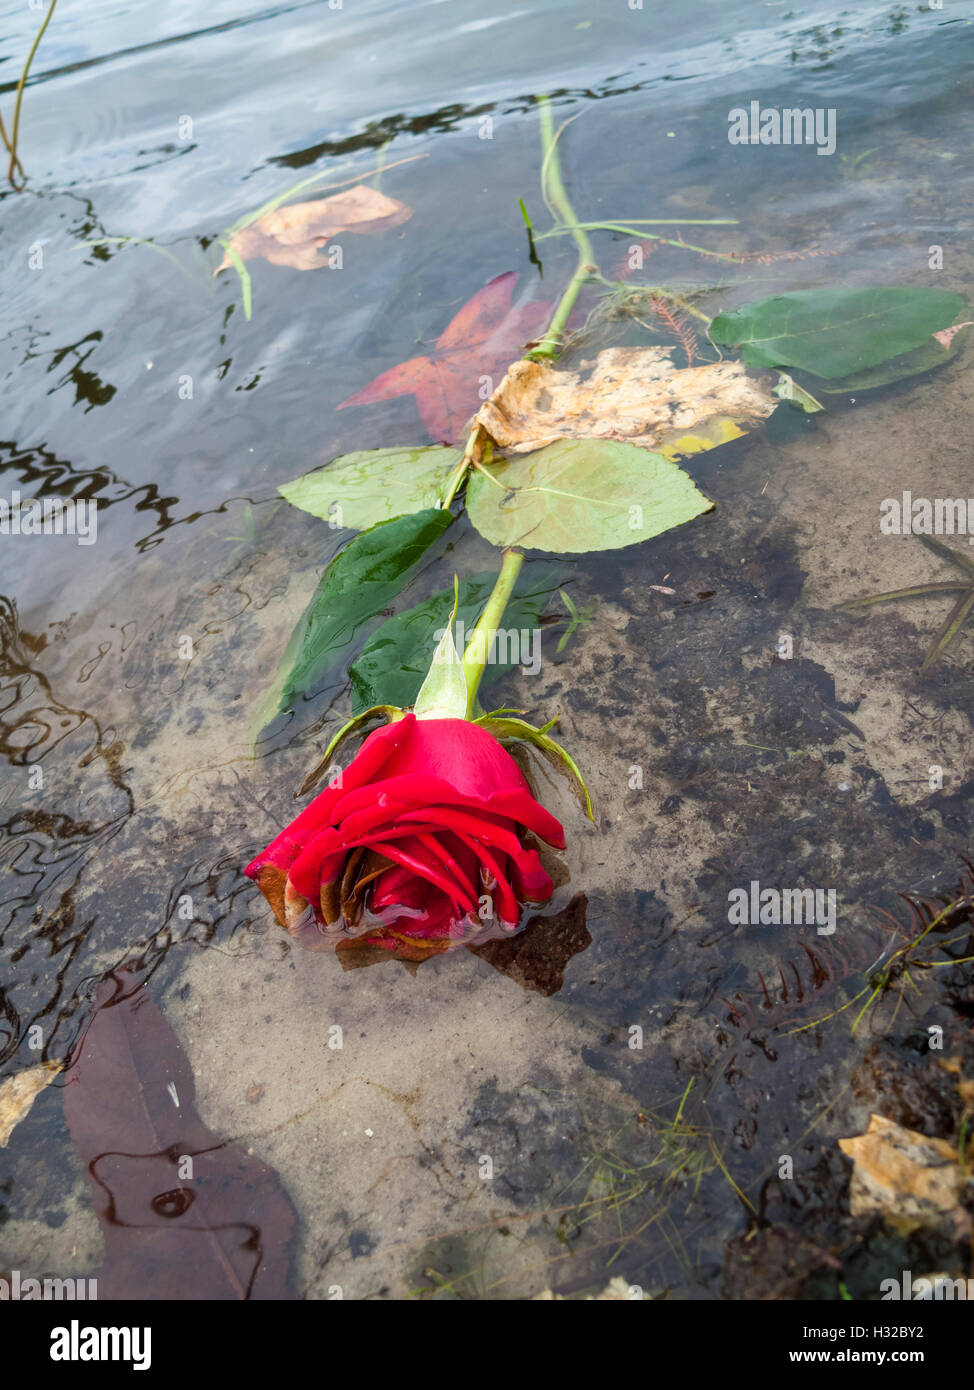 Concept photograph for broken heart failed romance relationship of dead red roses floating in a lake or river Stock Photo